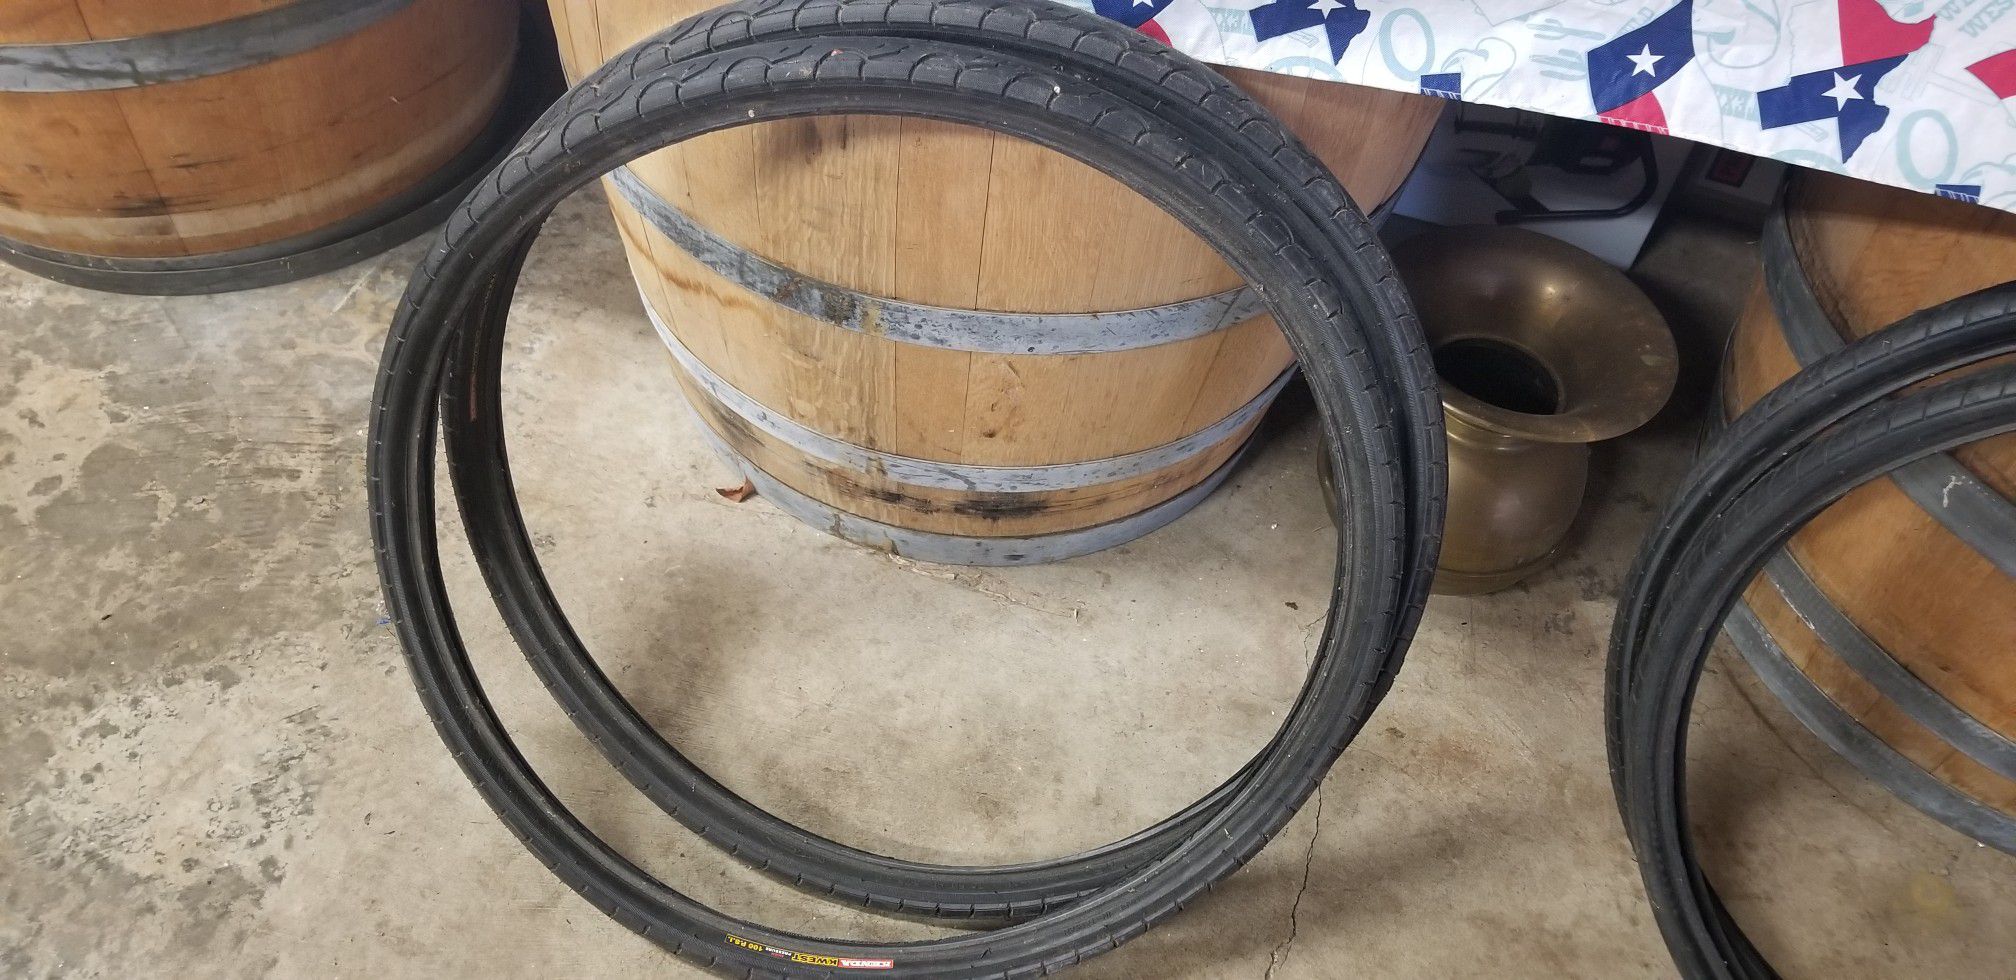 Pending pickup. FREE. 2 sets of 26 × 1.5 smooth road tires